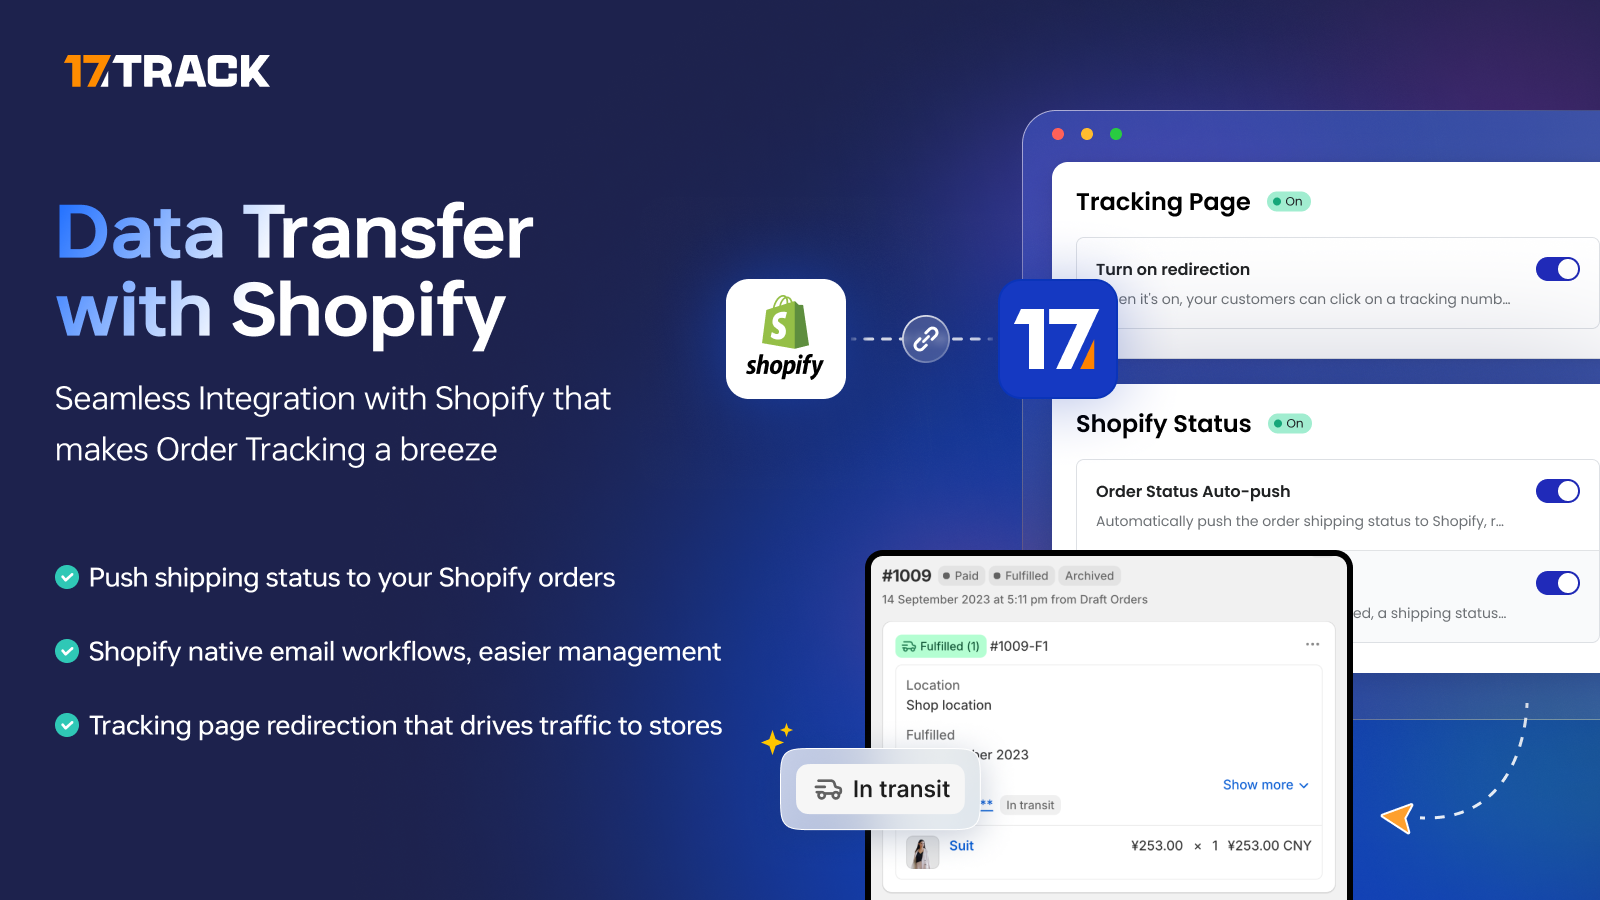 Data transfer with Shopify